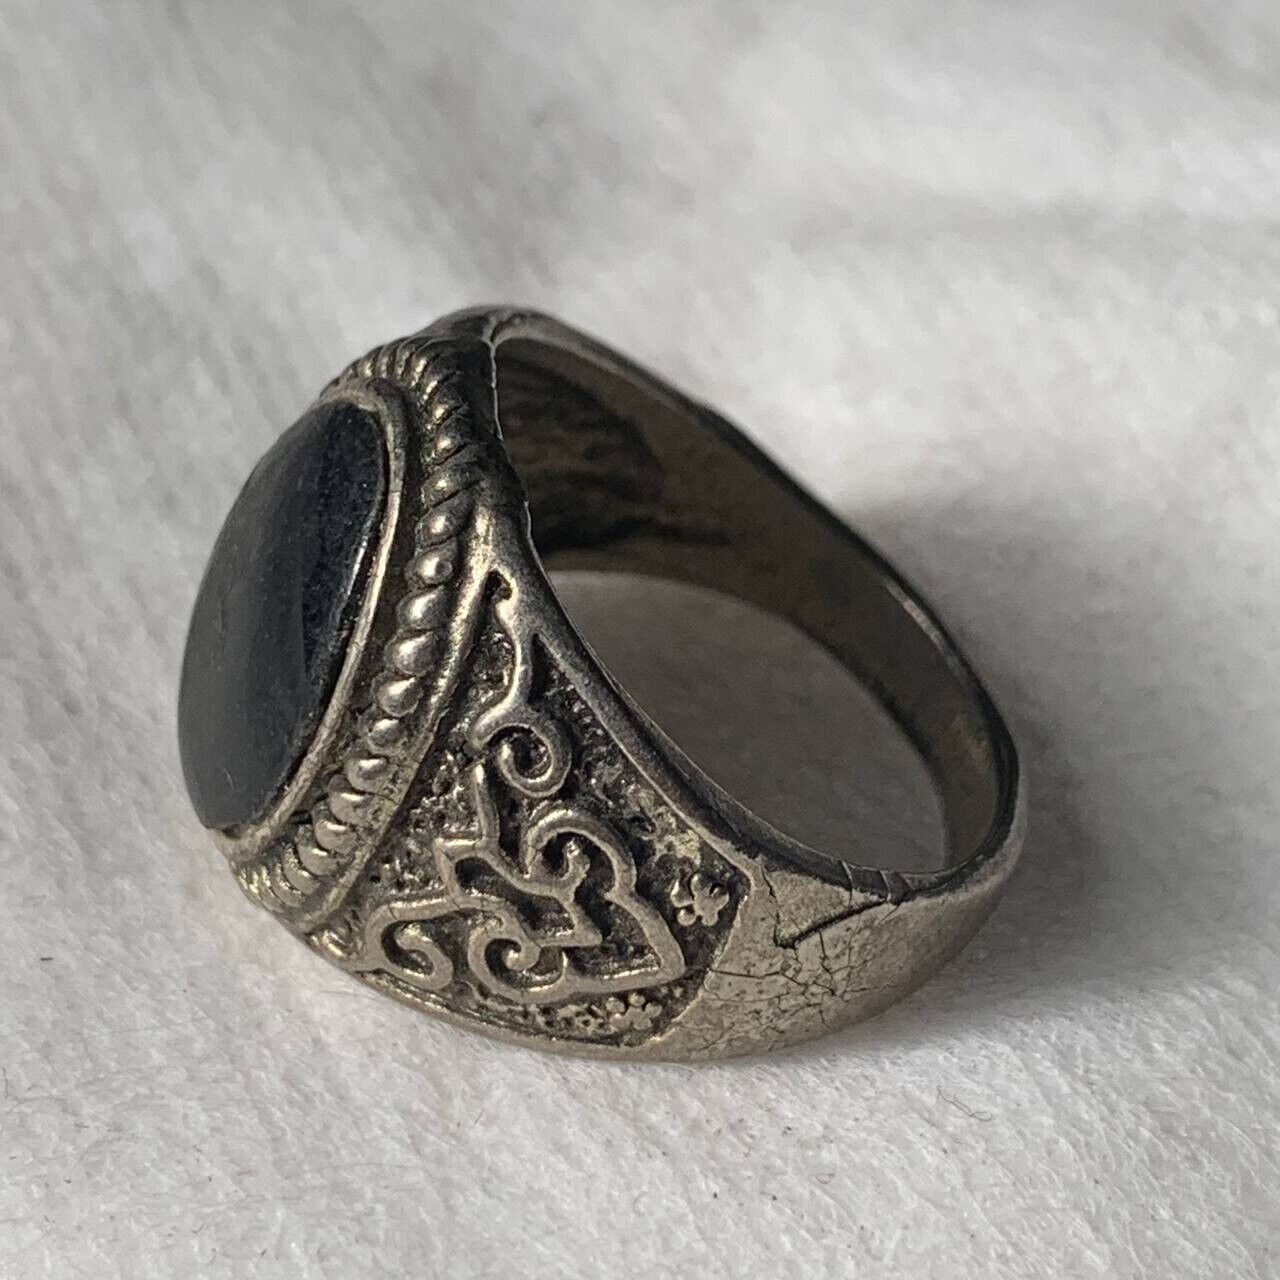 EXTREMELY VERY RARE ANCIENT SILVER ROMAN RING BLACK STONE OLD ARTIFACT AUTHENTIC